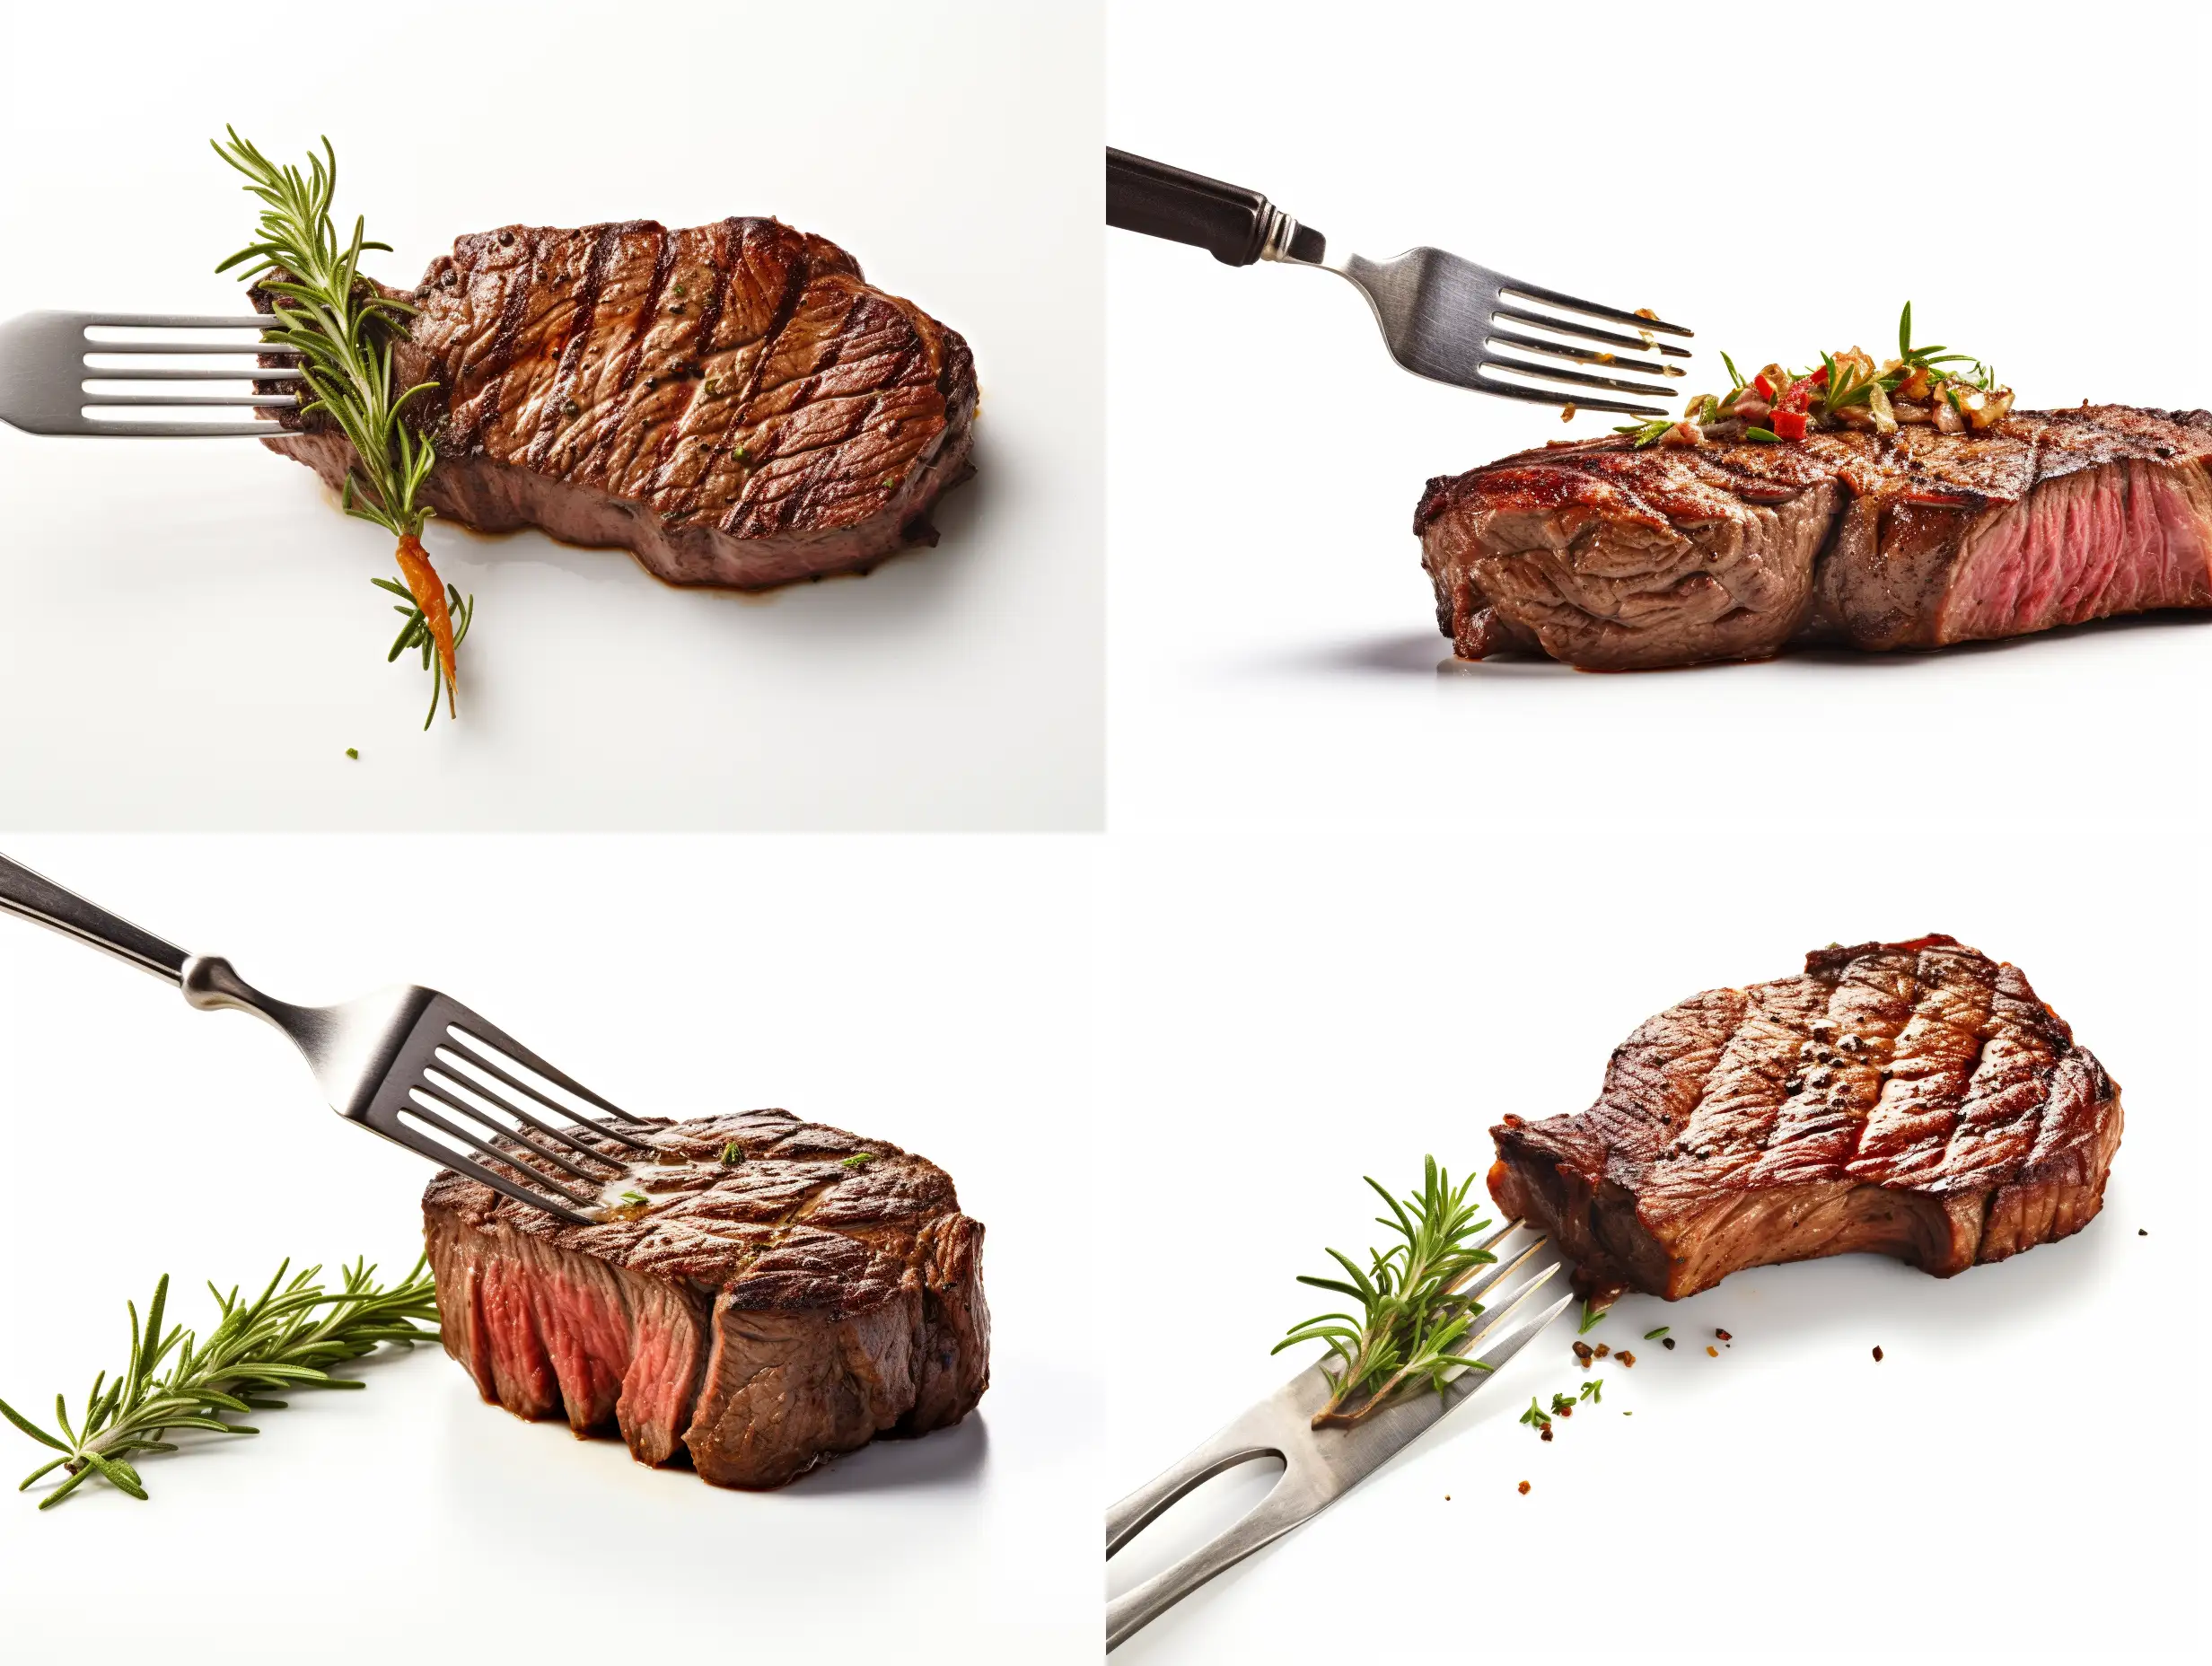 Juicy-Grilled-Oversized-Steak-on-Fork-HighQuality-Photo-on-White-Background